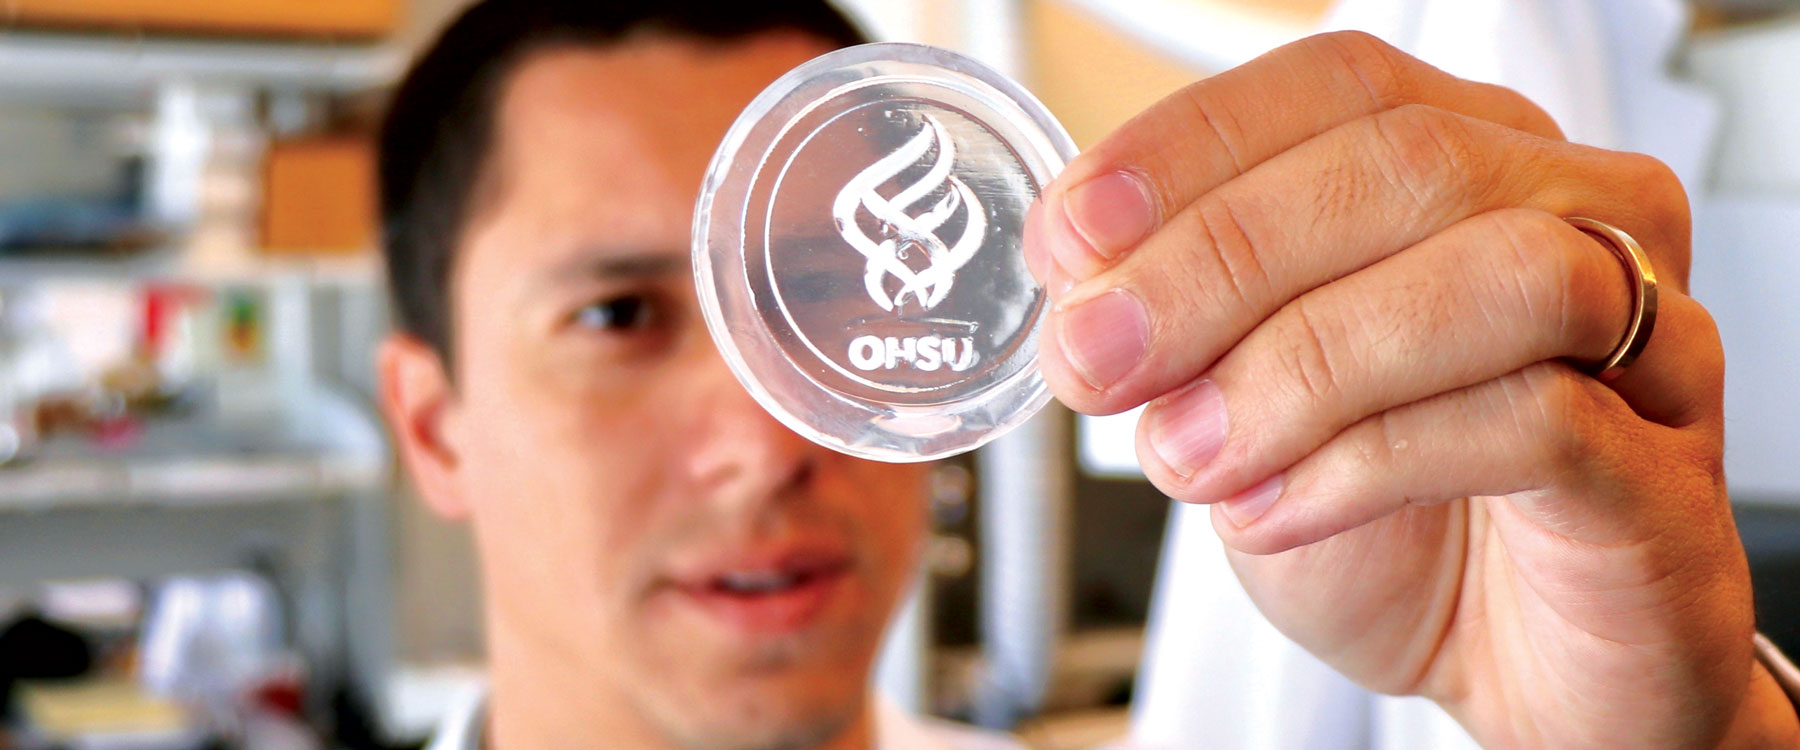 lab worker holding up a petri dish with OHSU logo